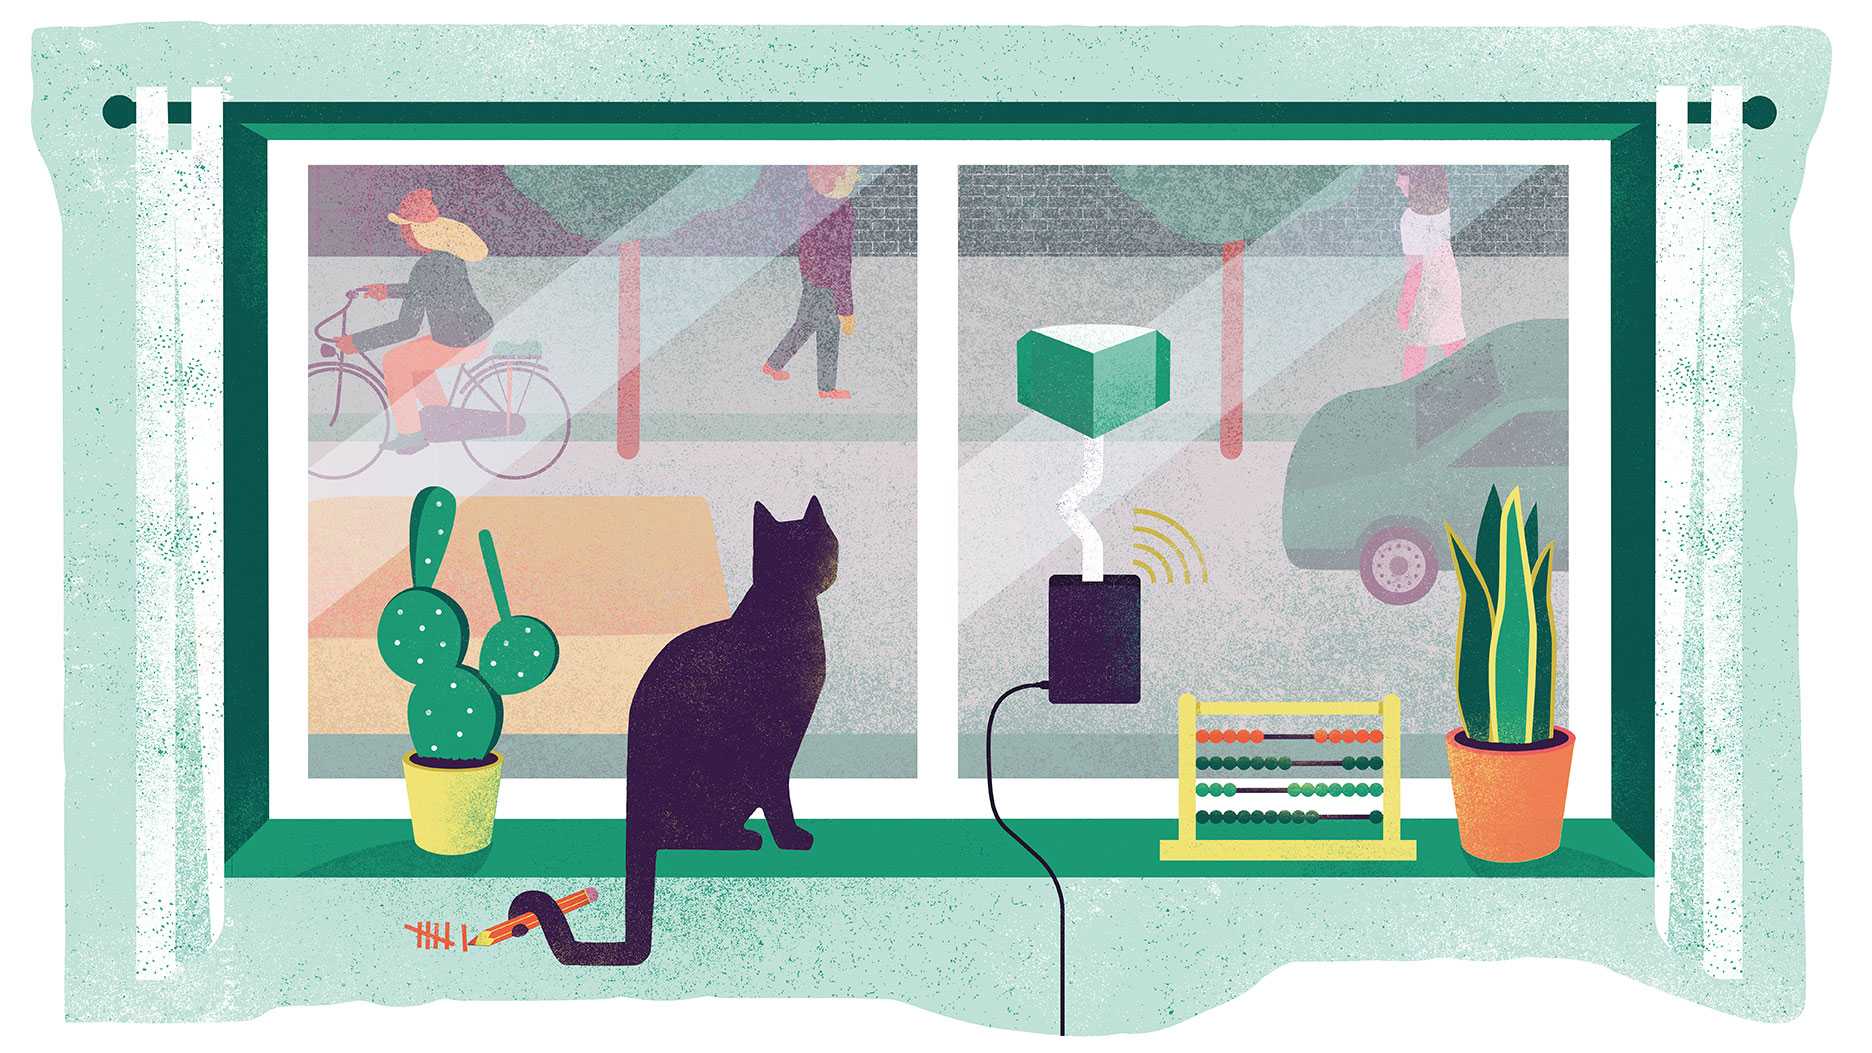 An illustration of a cat and a sensor in a window overlooking a busy street.